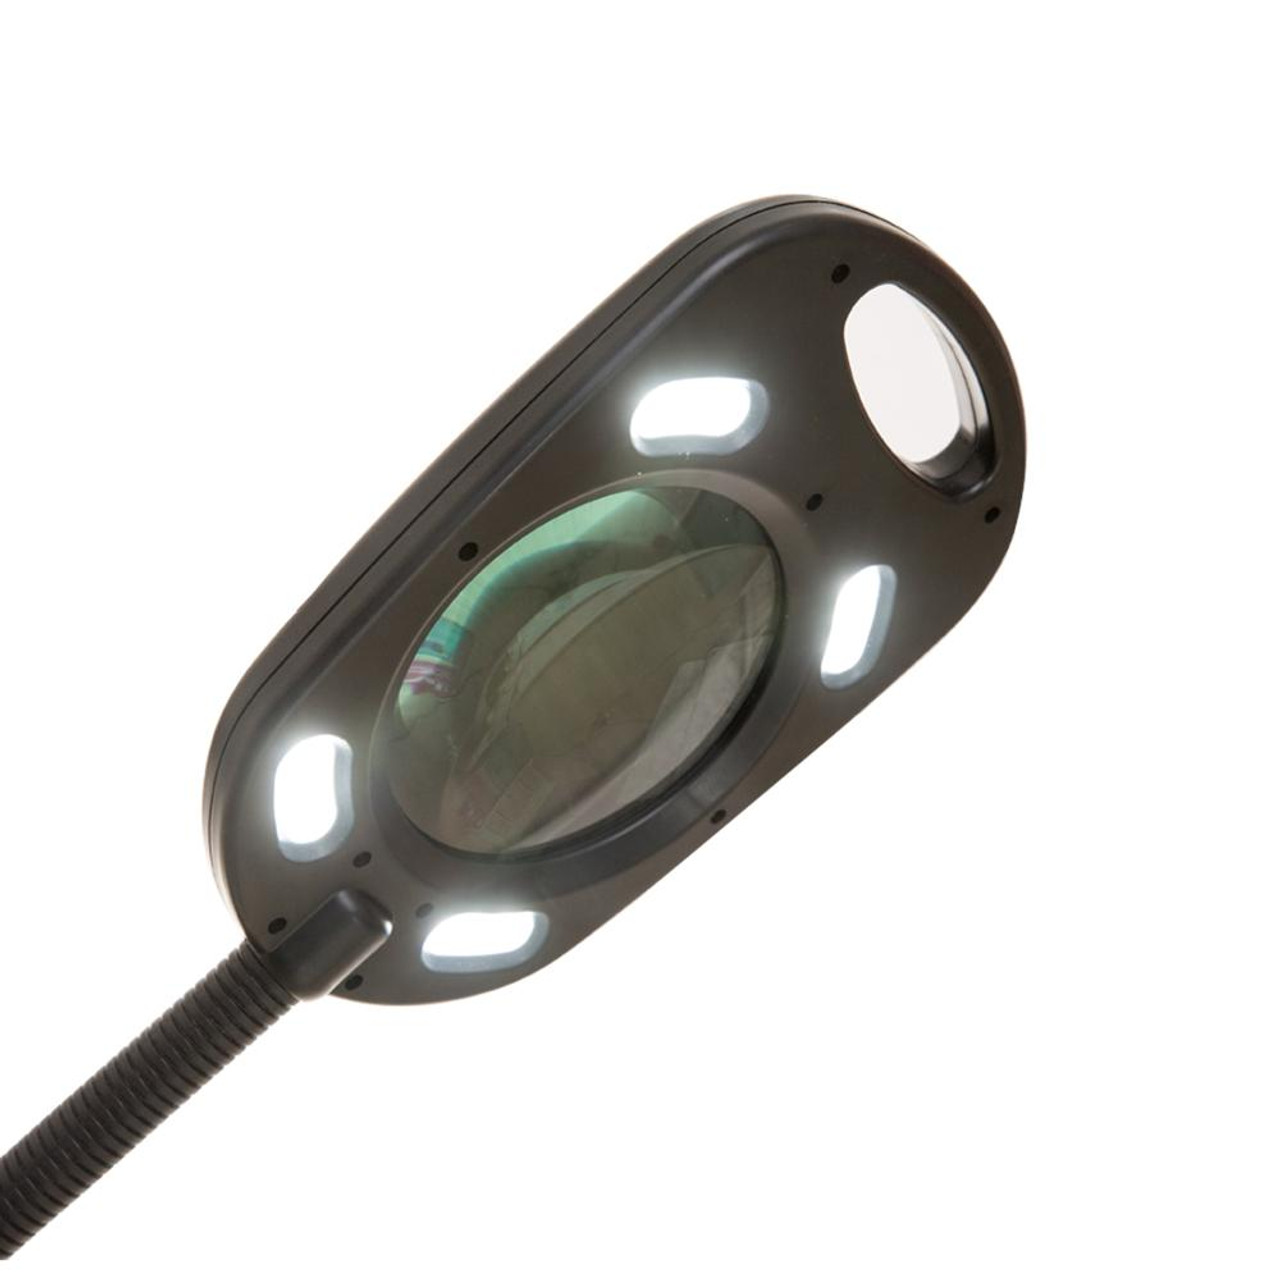 LED Floor Lamp with 4X Magnifier